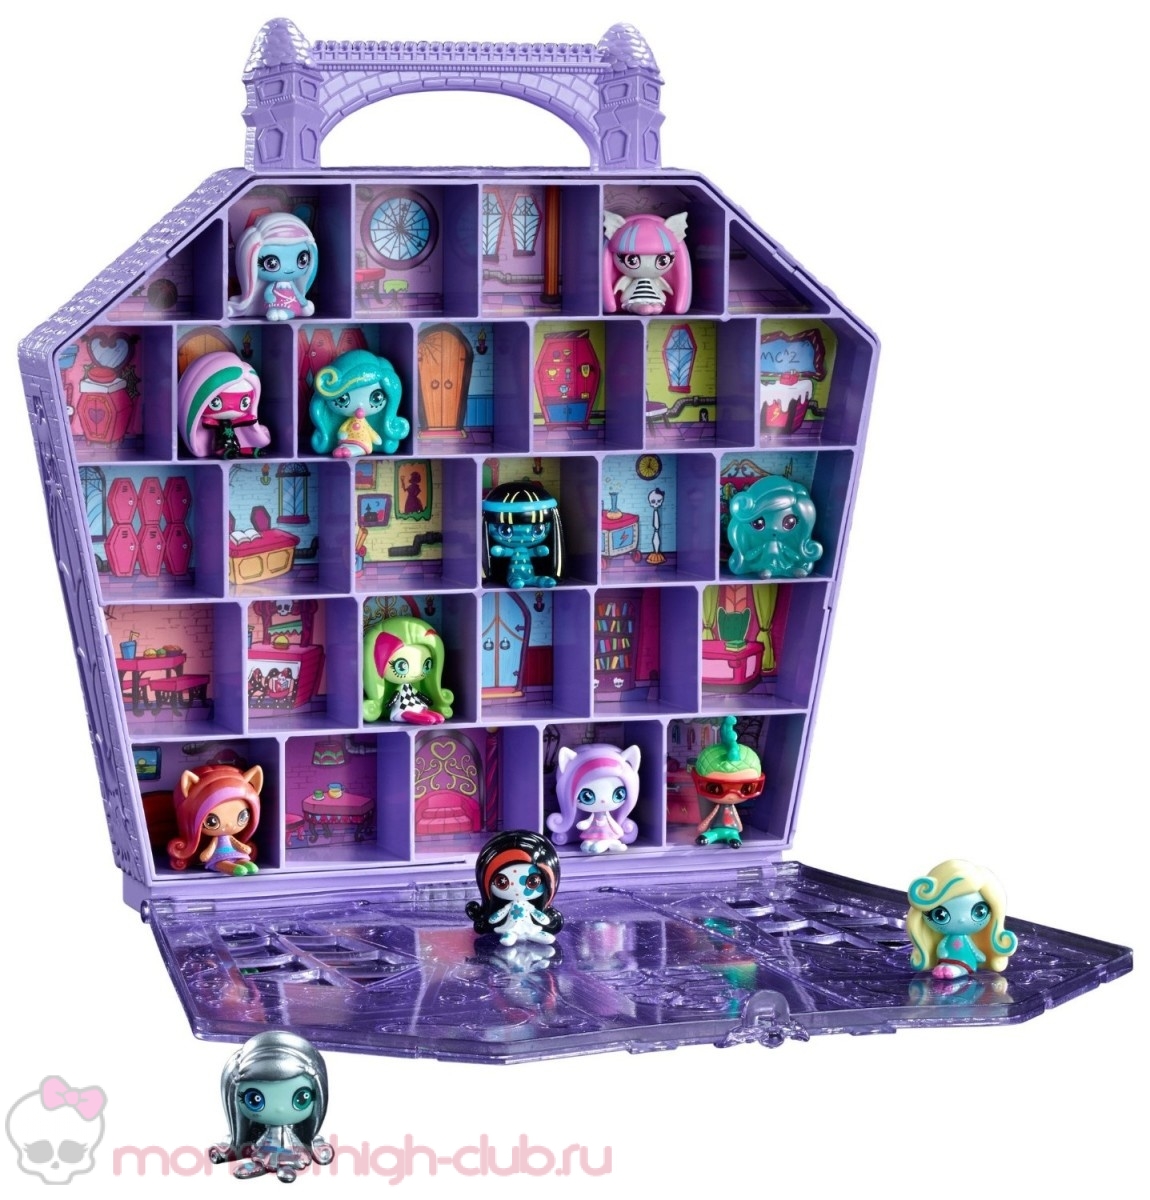 monster_high_minis_carrying_case_with_frankie_stein_space_ghouls_promo (1)